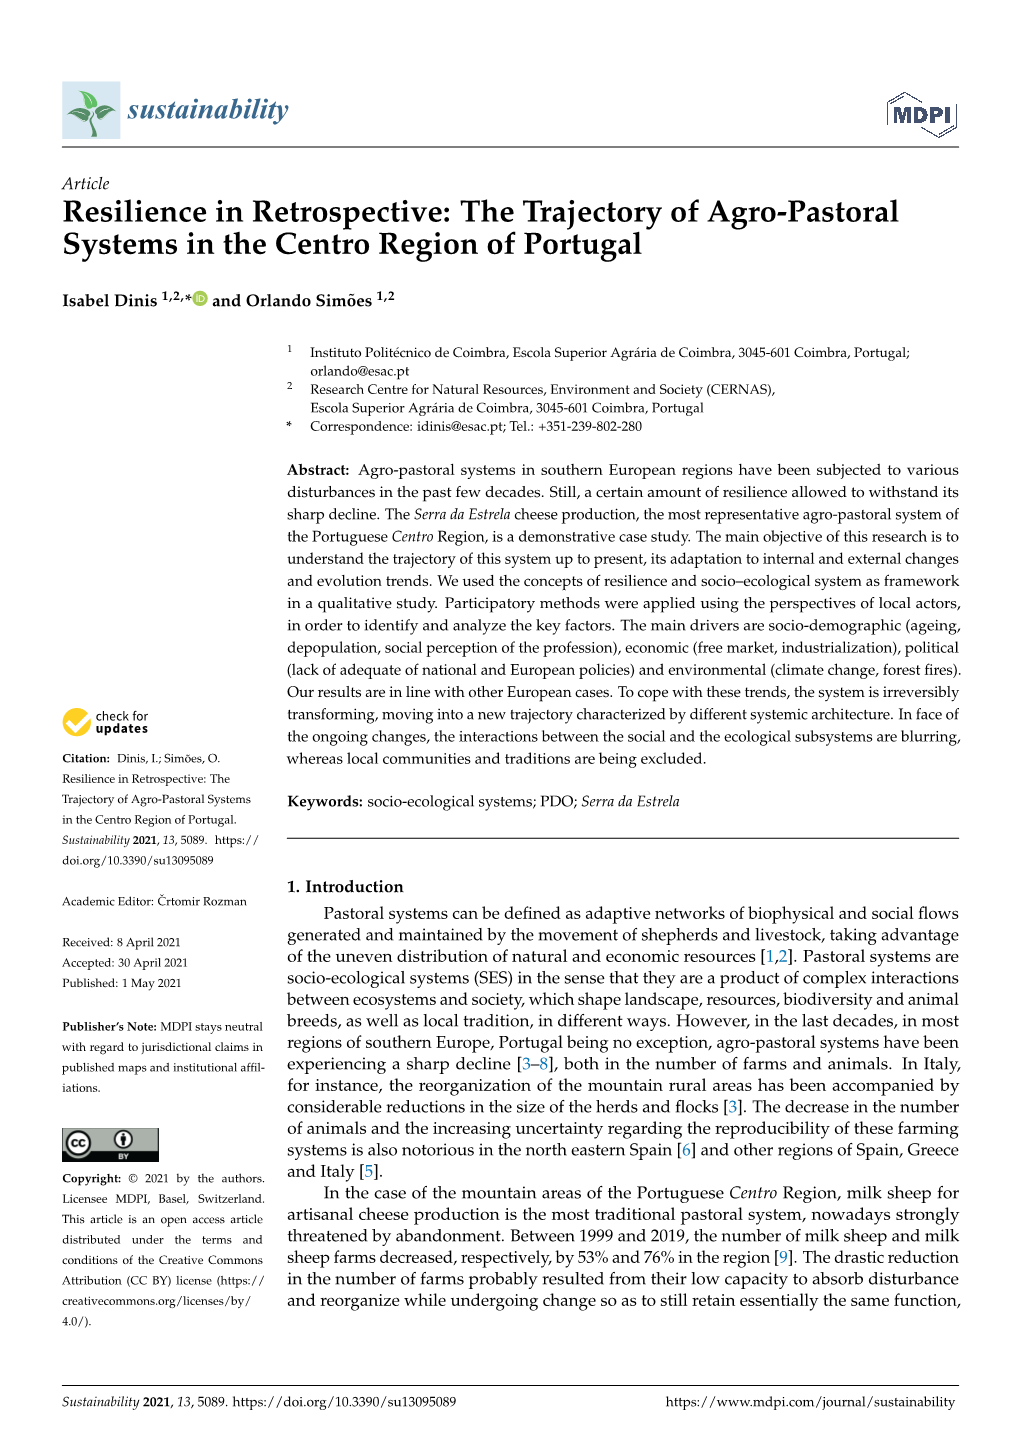 The Trajectory of Agro-Pastoral Systems in the Centro Region of Portugal